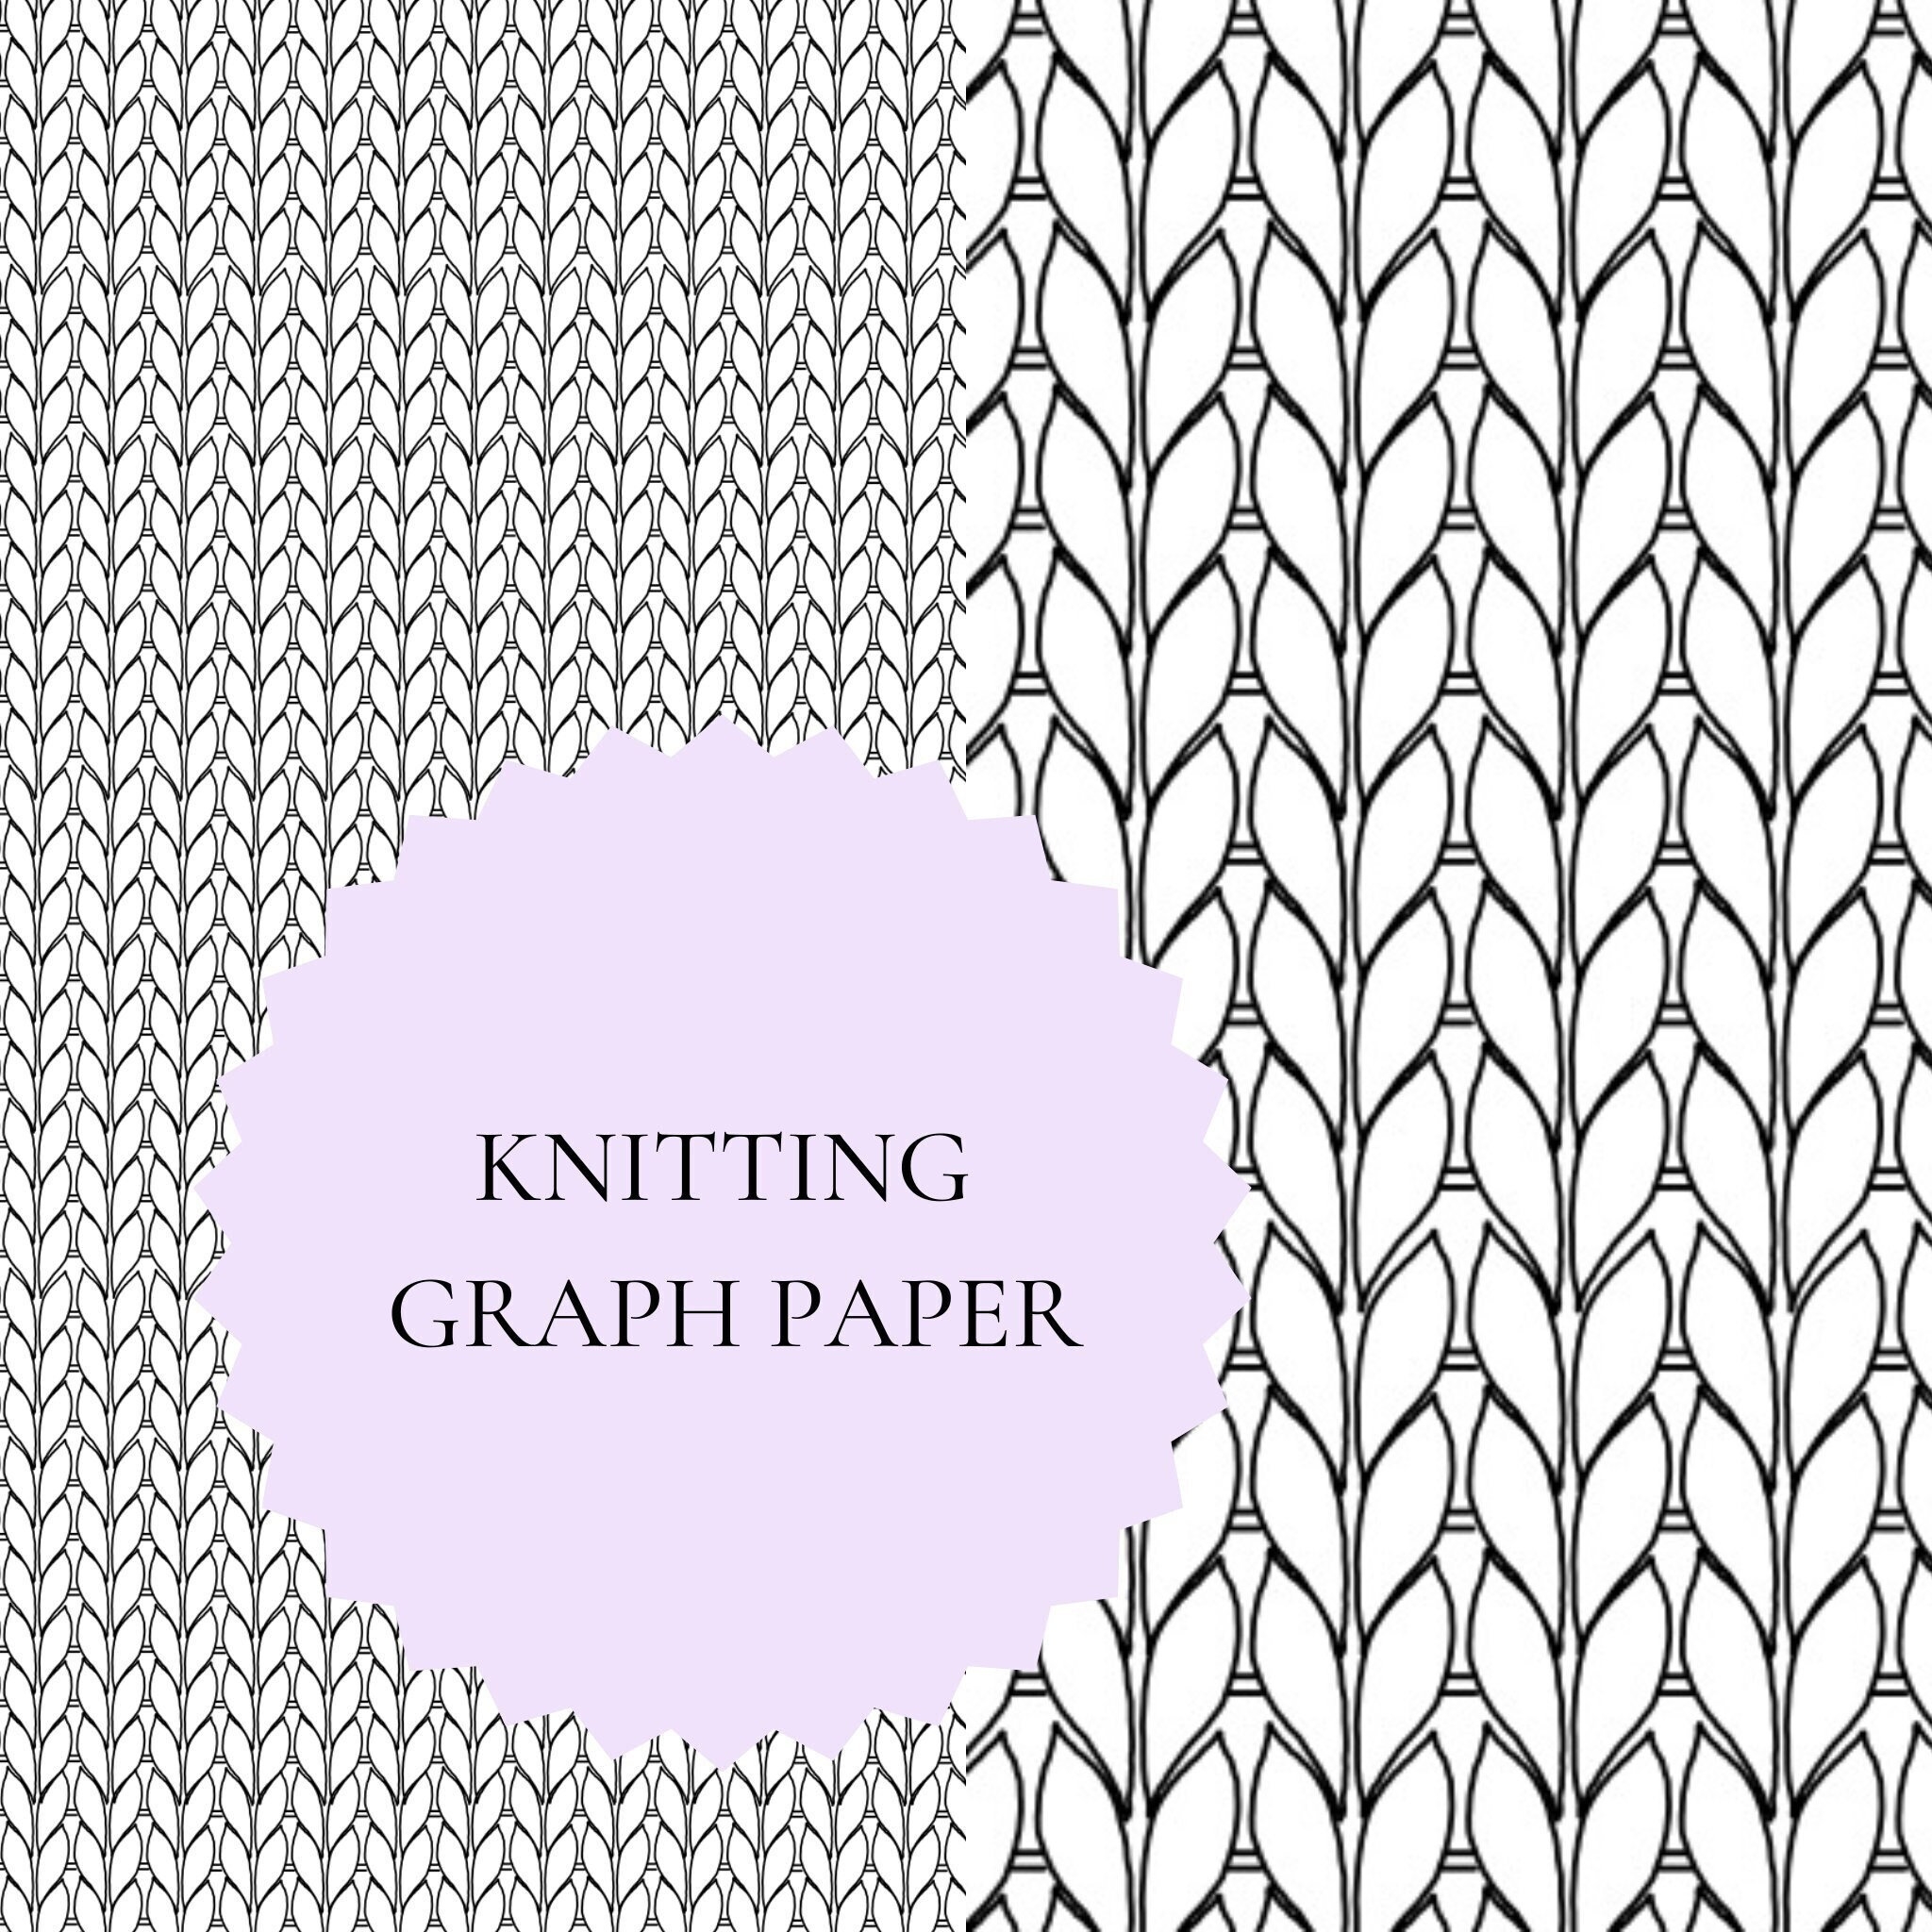 Knit Stitch Blank Printable Graph Paper Blank Knitting Stockinette Stitches Template Grid For Coloring Color Work Fair Isle Designs Etsy